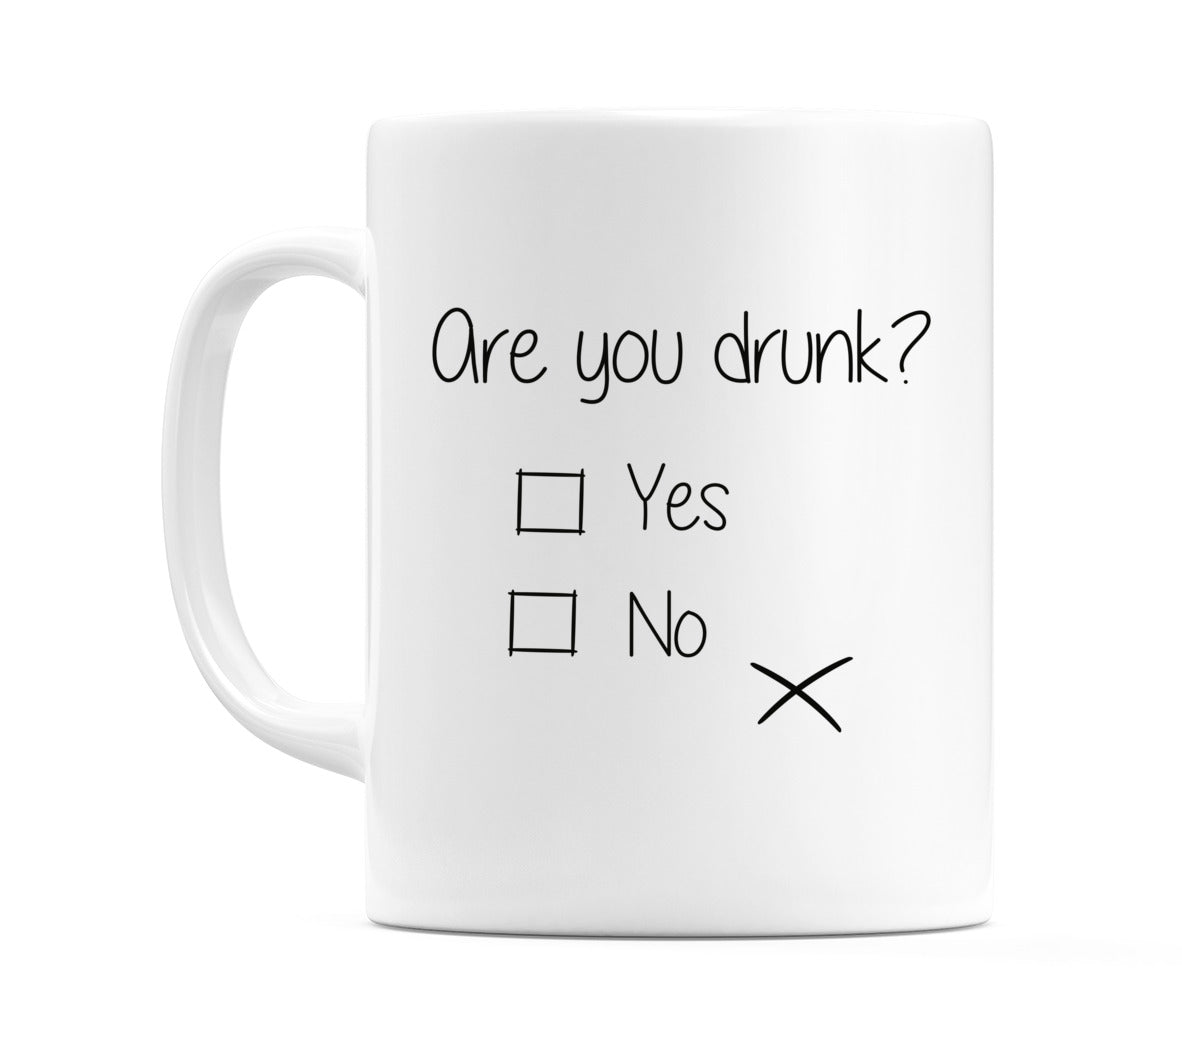 Are you drunk? Yes - No Mug